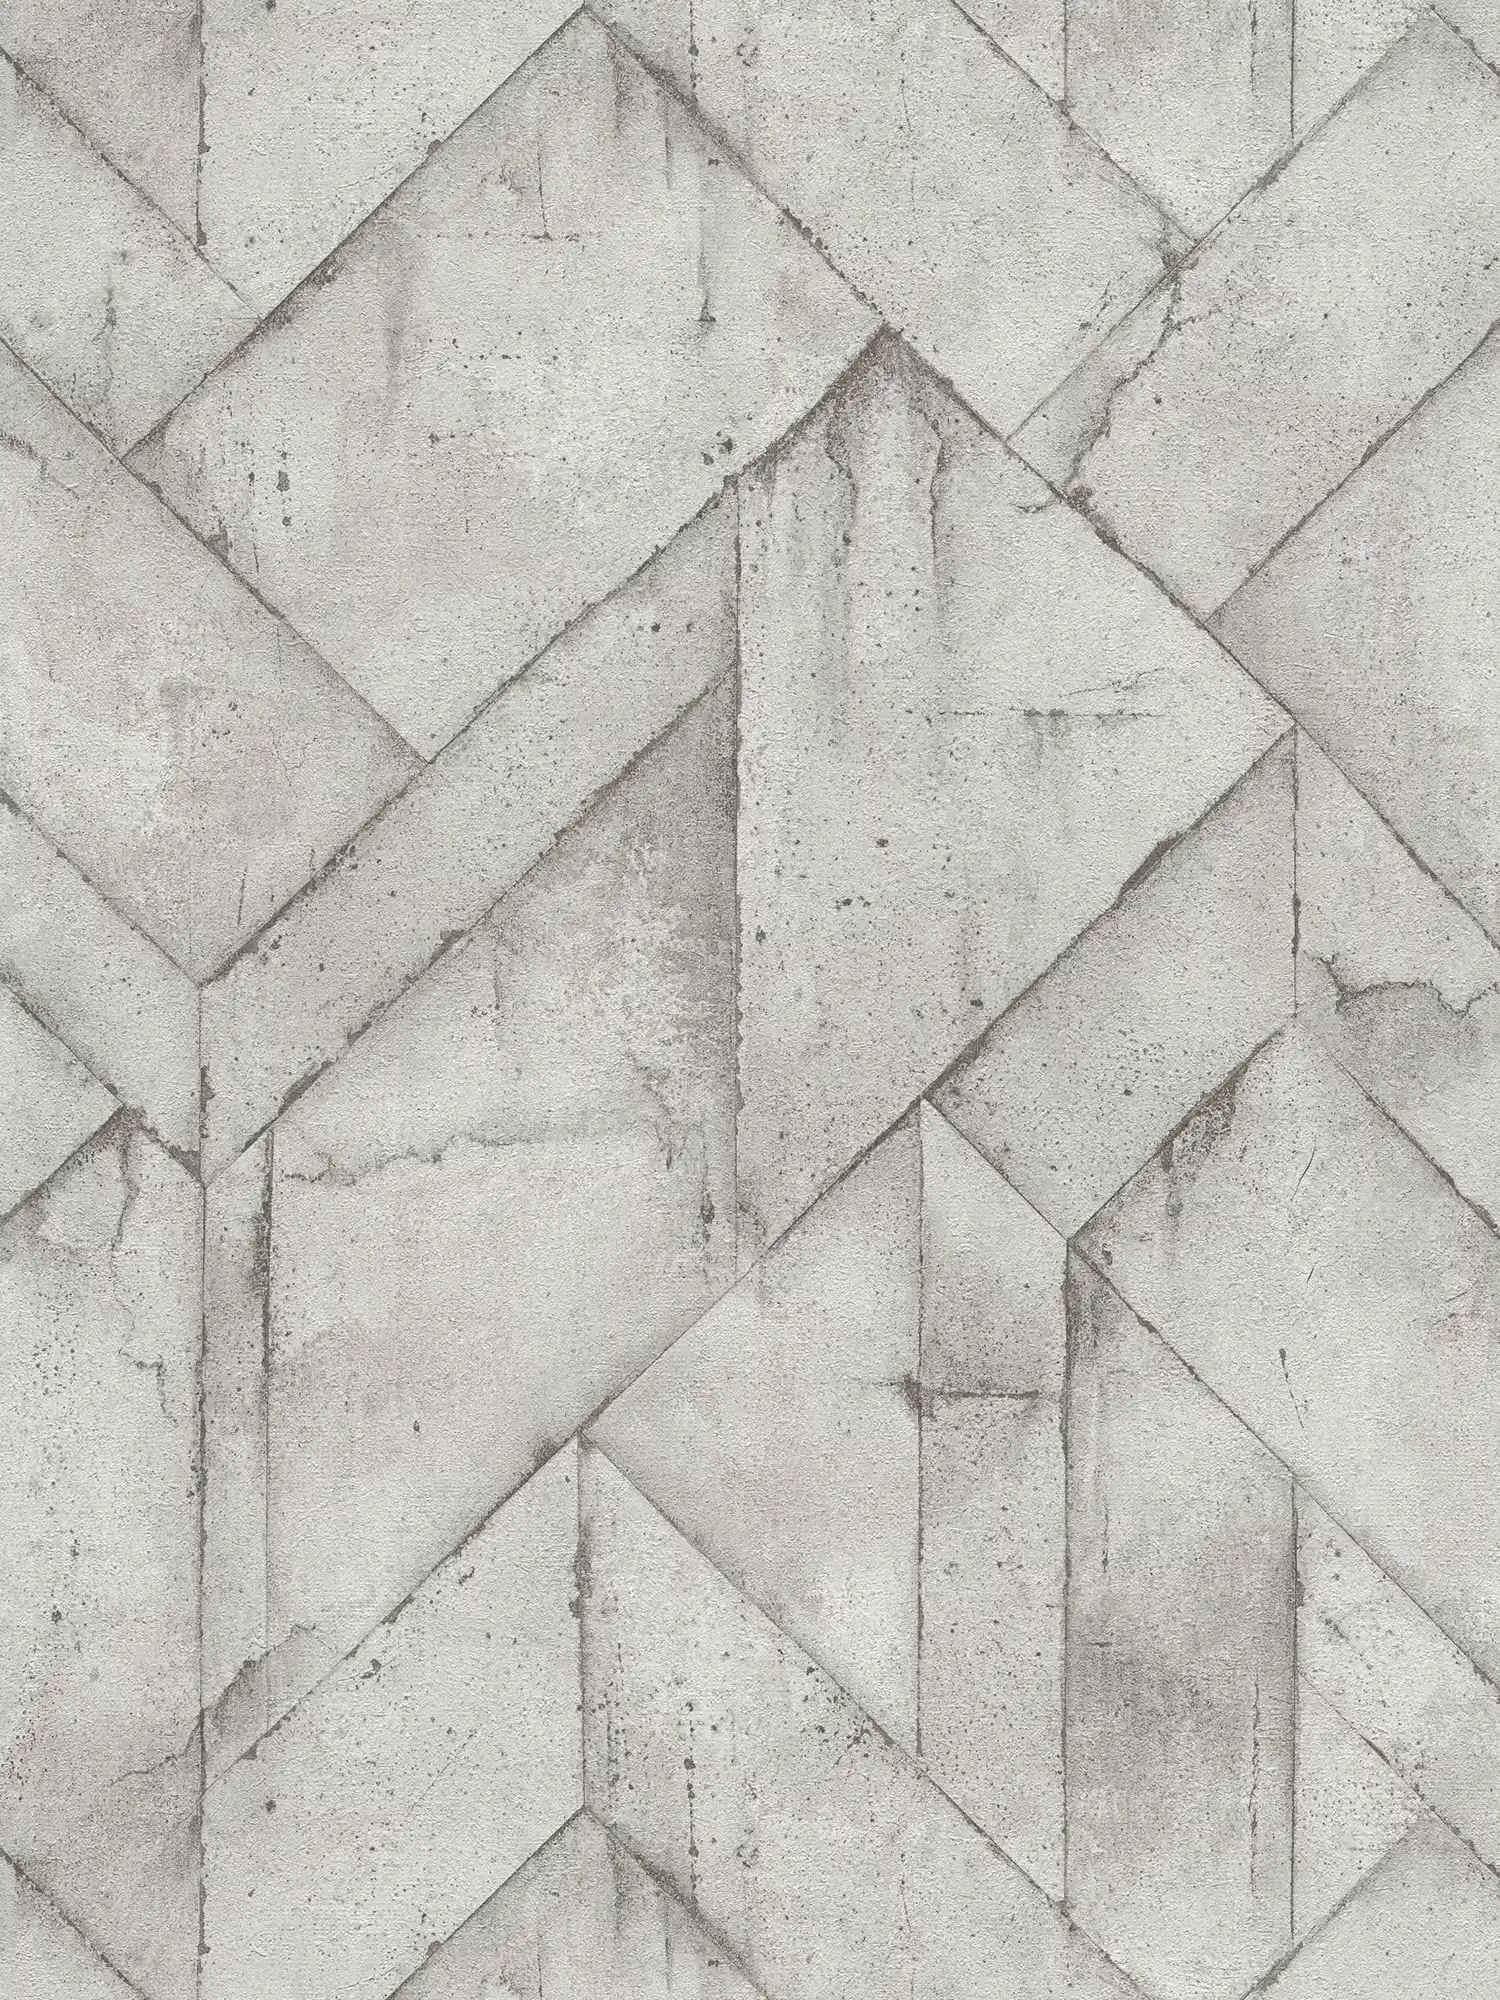 Concrete wallpaper tiles, used look - grey, white, anthracite
